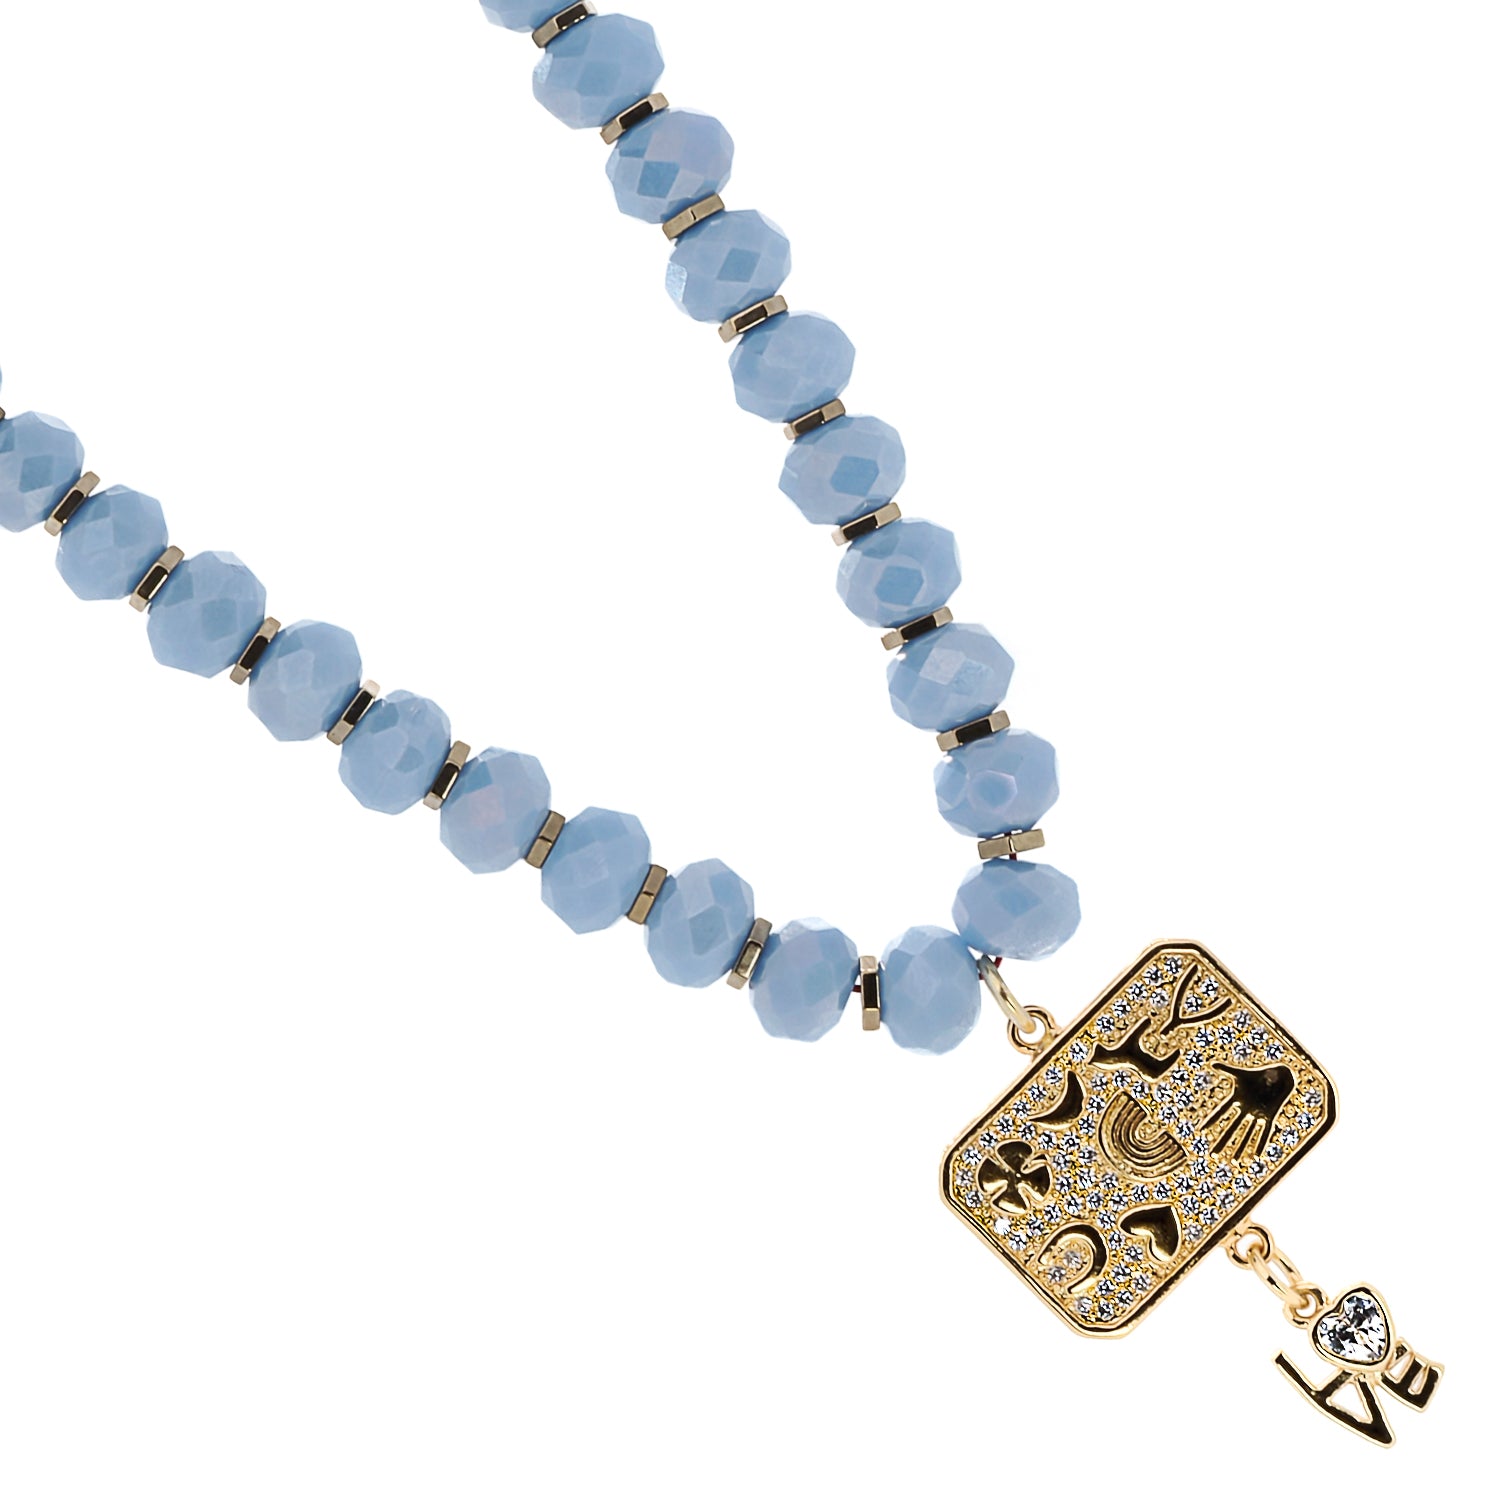 A stunning choker necklace with blue crystal beads and gold hematite spacers.